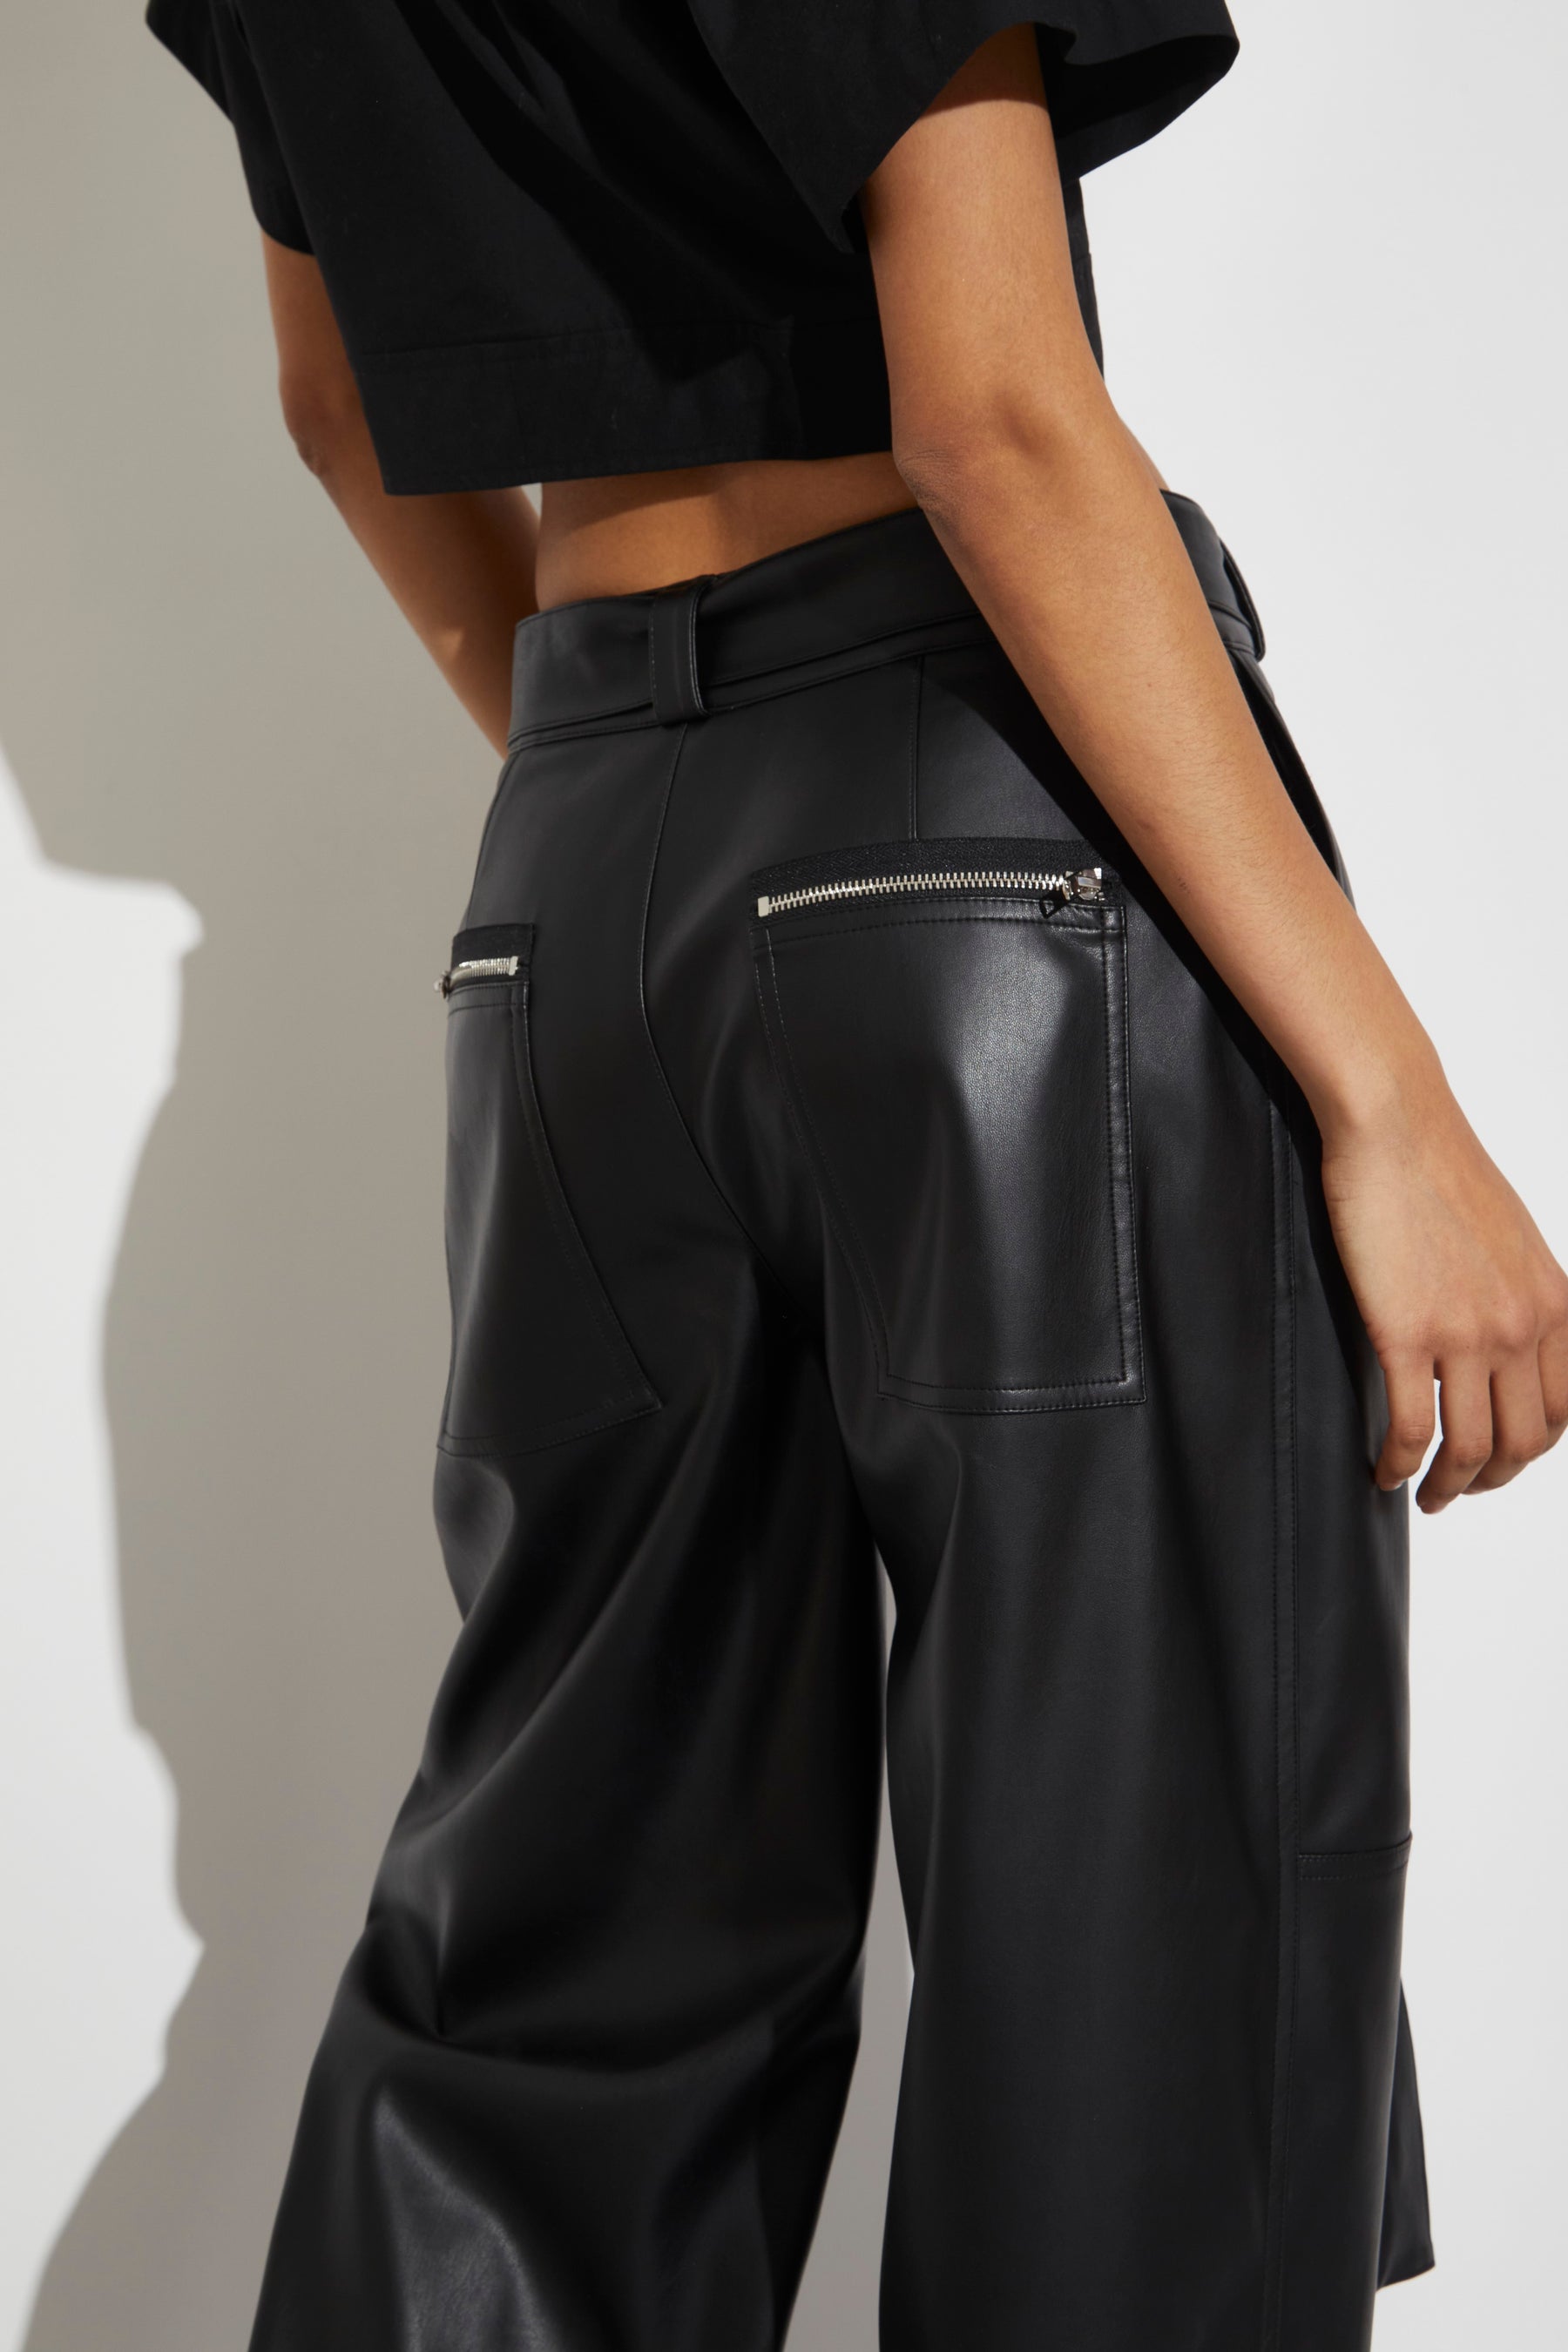 Artistic Leather Skinny Petite Faux Leather Trousers For Women Sexy Solid  Pencil Pants With Fashions From Here_well, $35.62